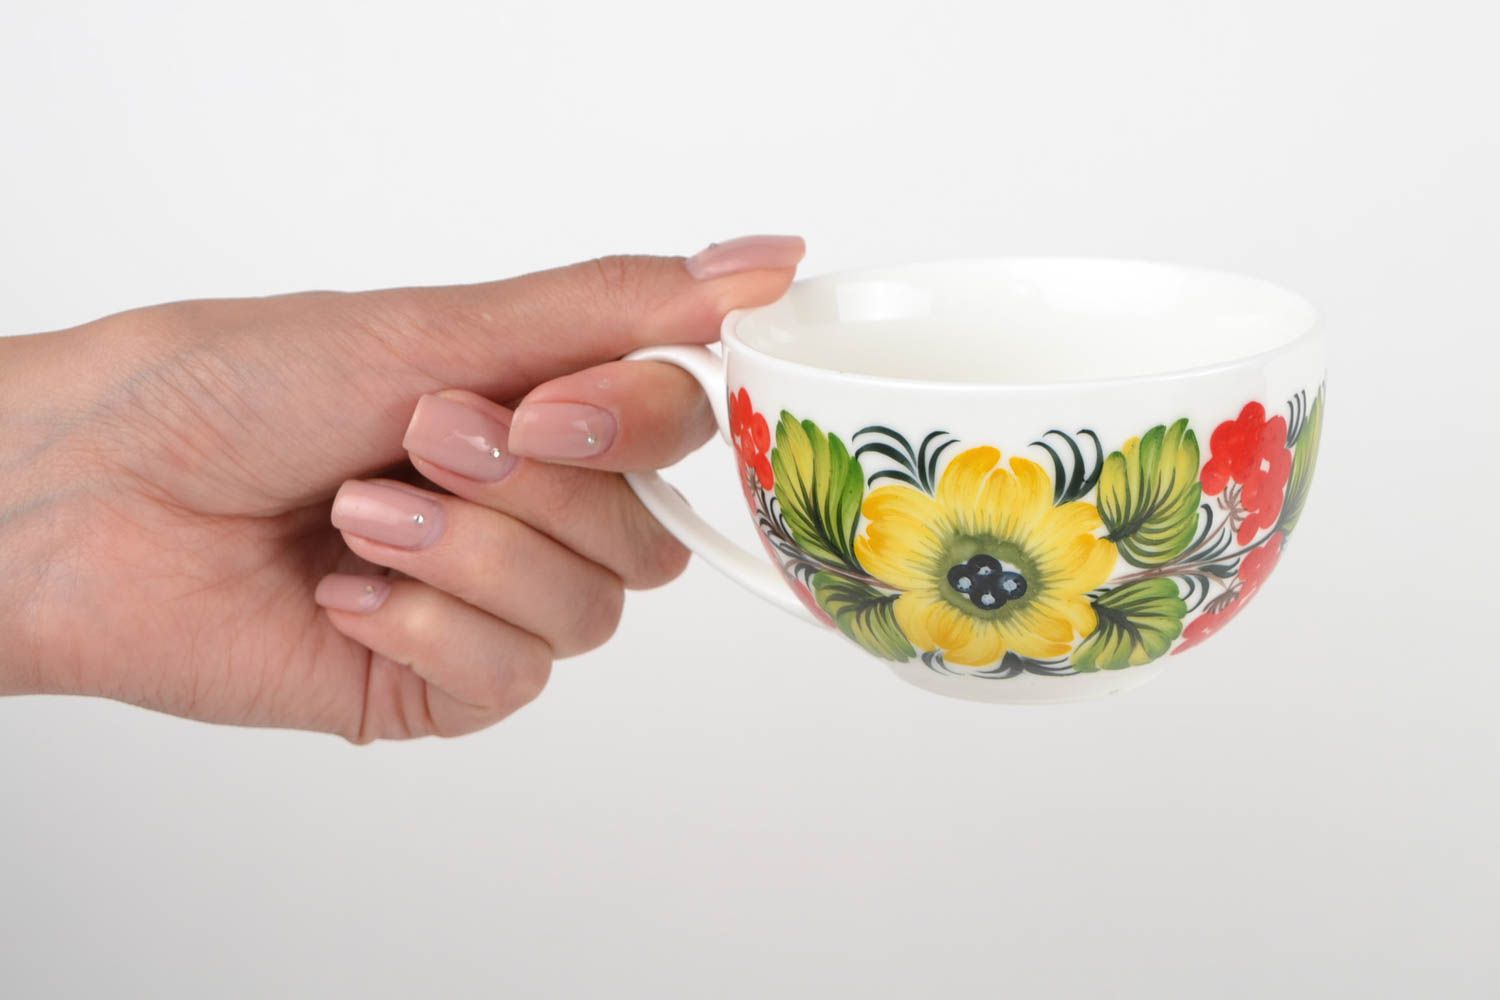 8,5 oz ceramic porcelain teacup with handle and floral design in Russian style 0,39 lb photo 2